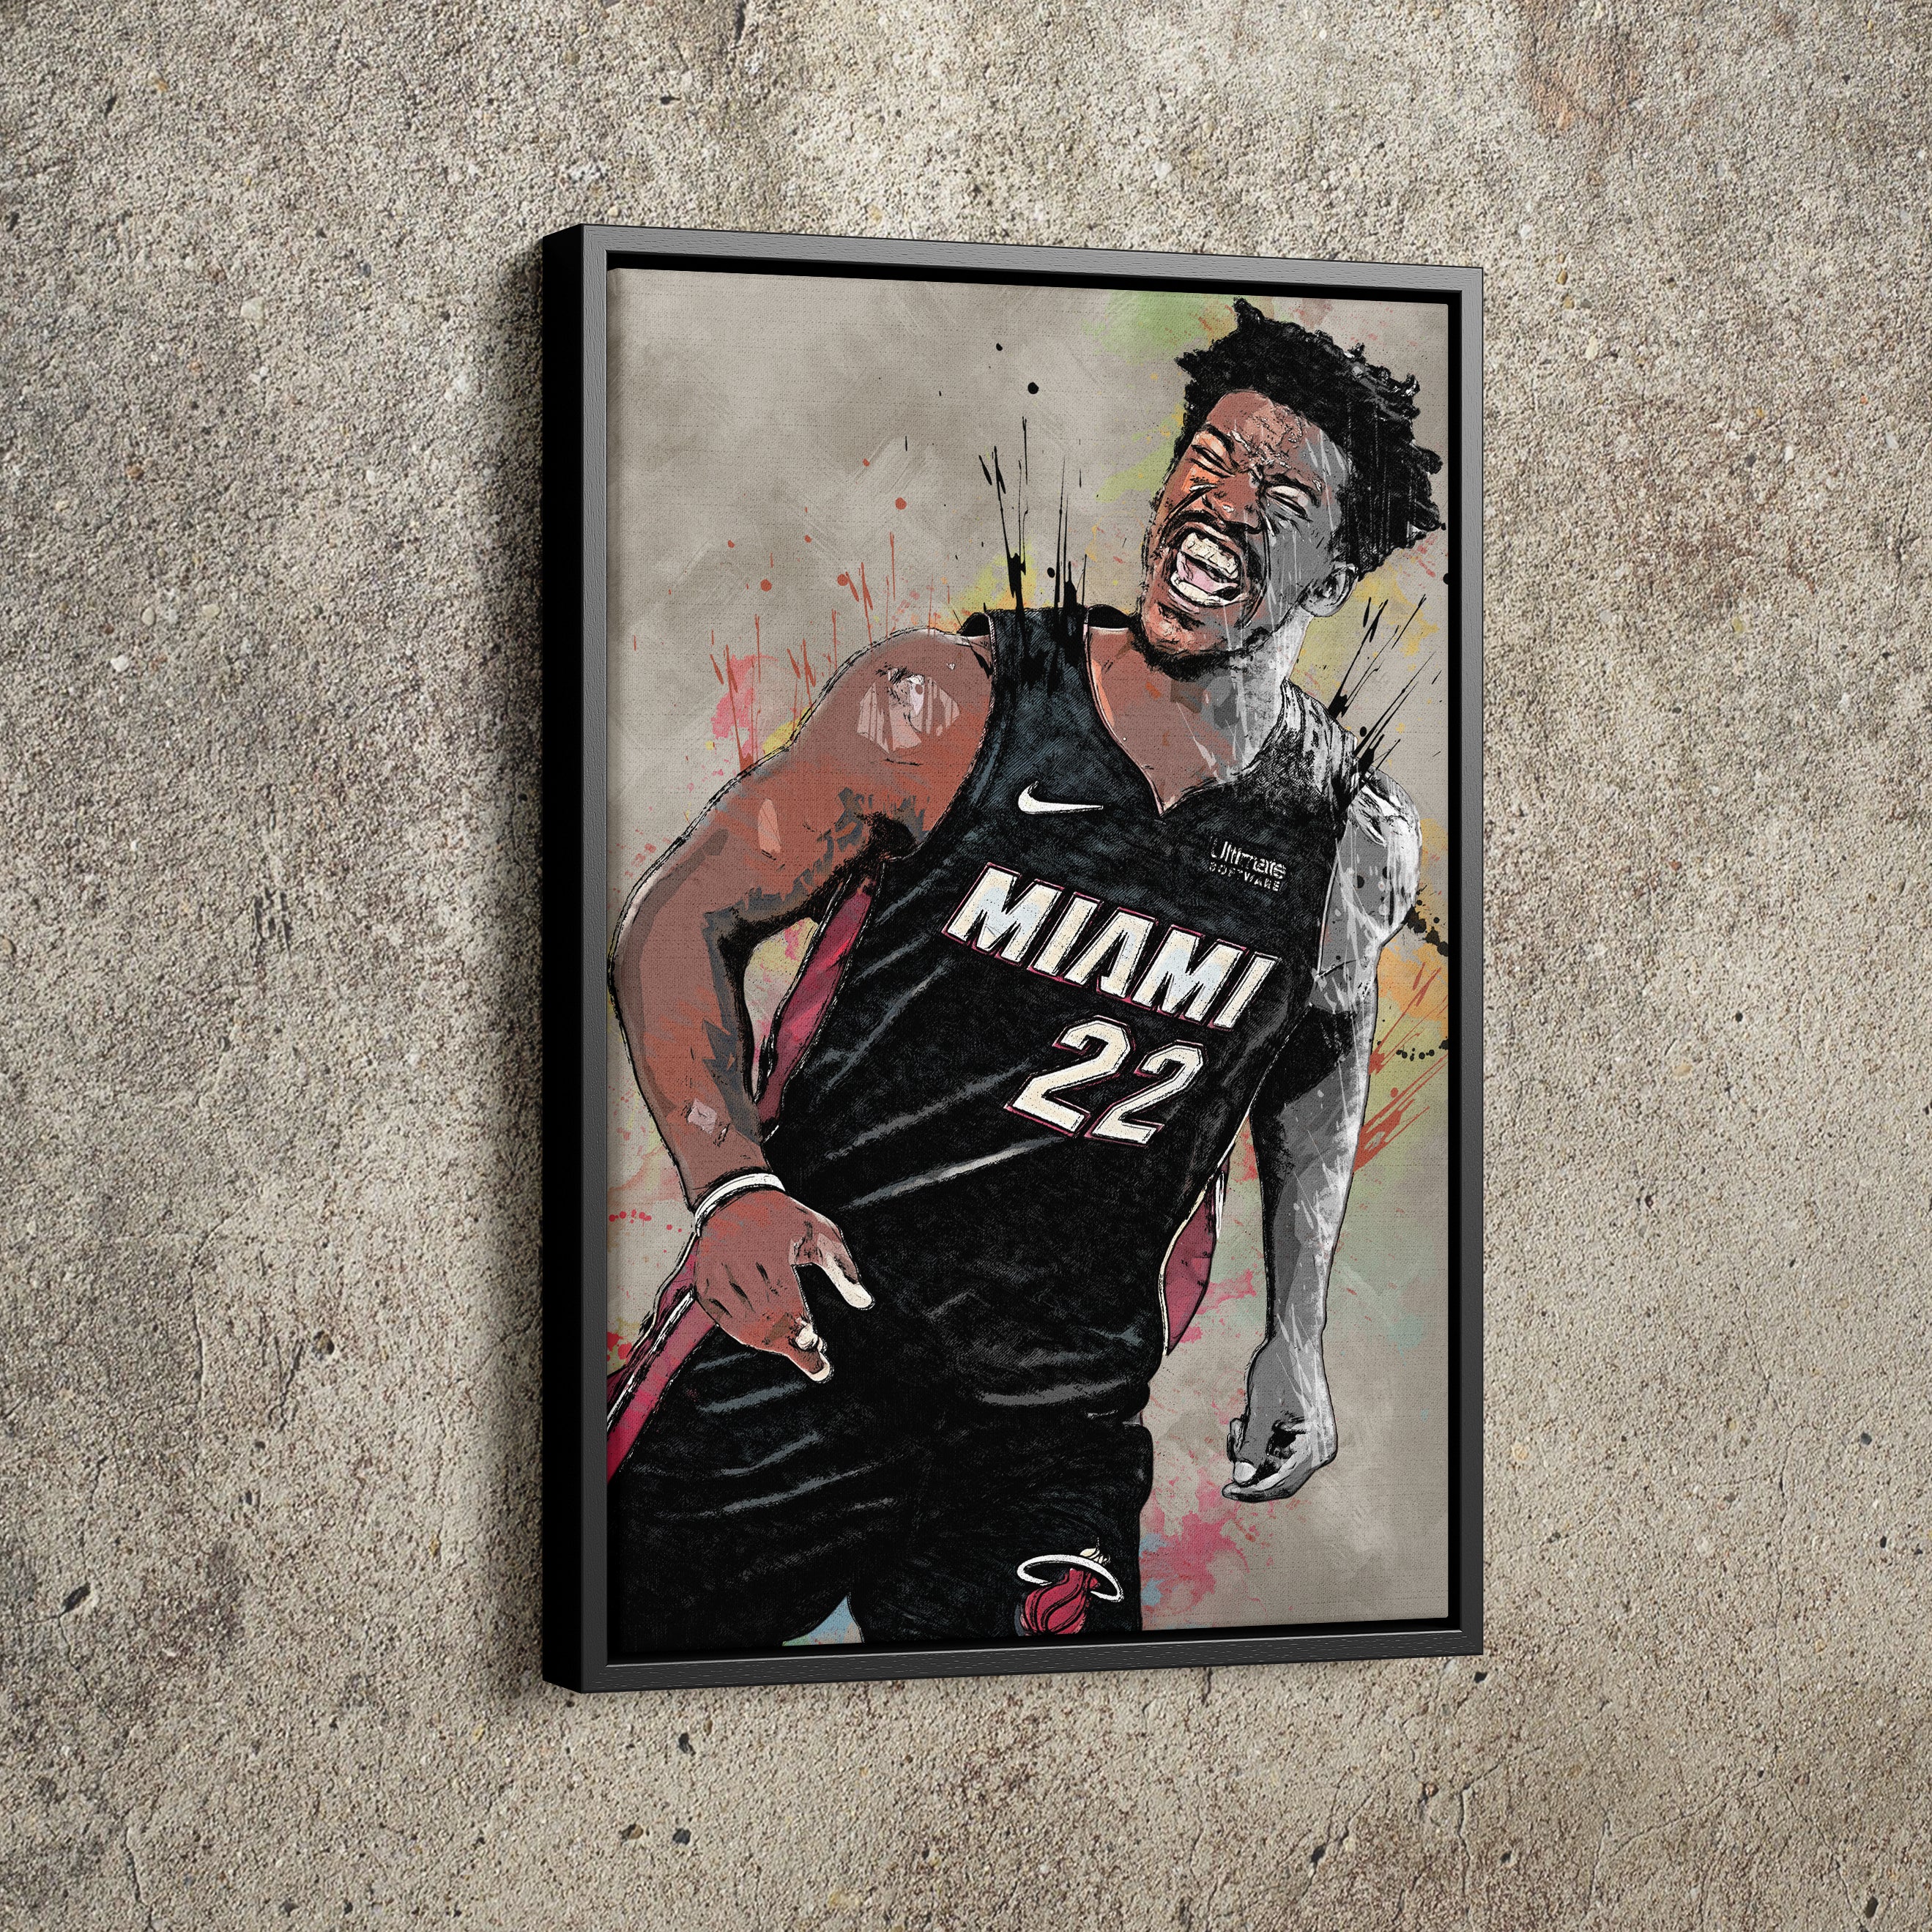 Jimmy Butler Miami Heat Poster Jimmy Butler Poster Miami -  Sweden